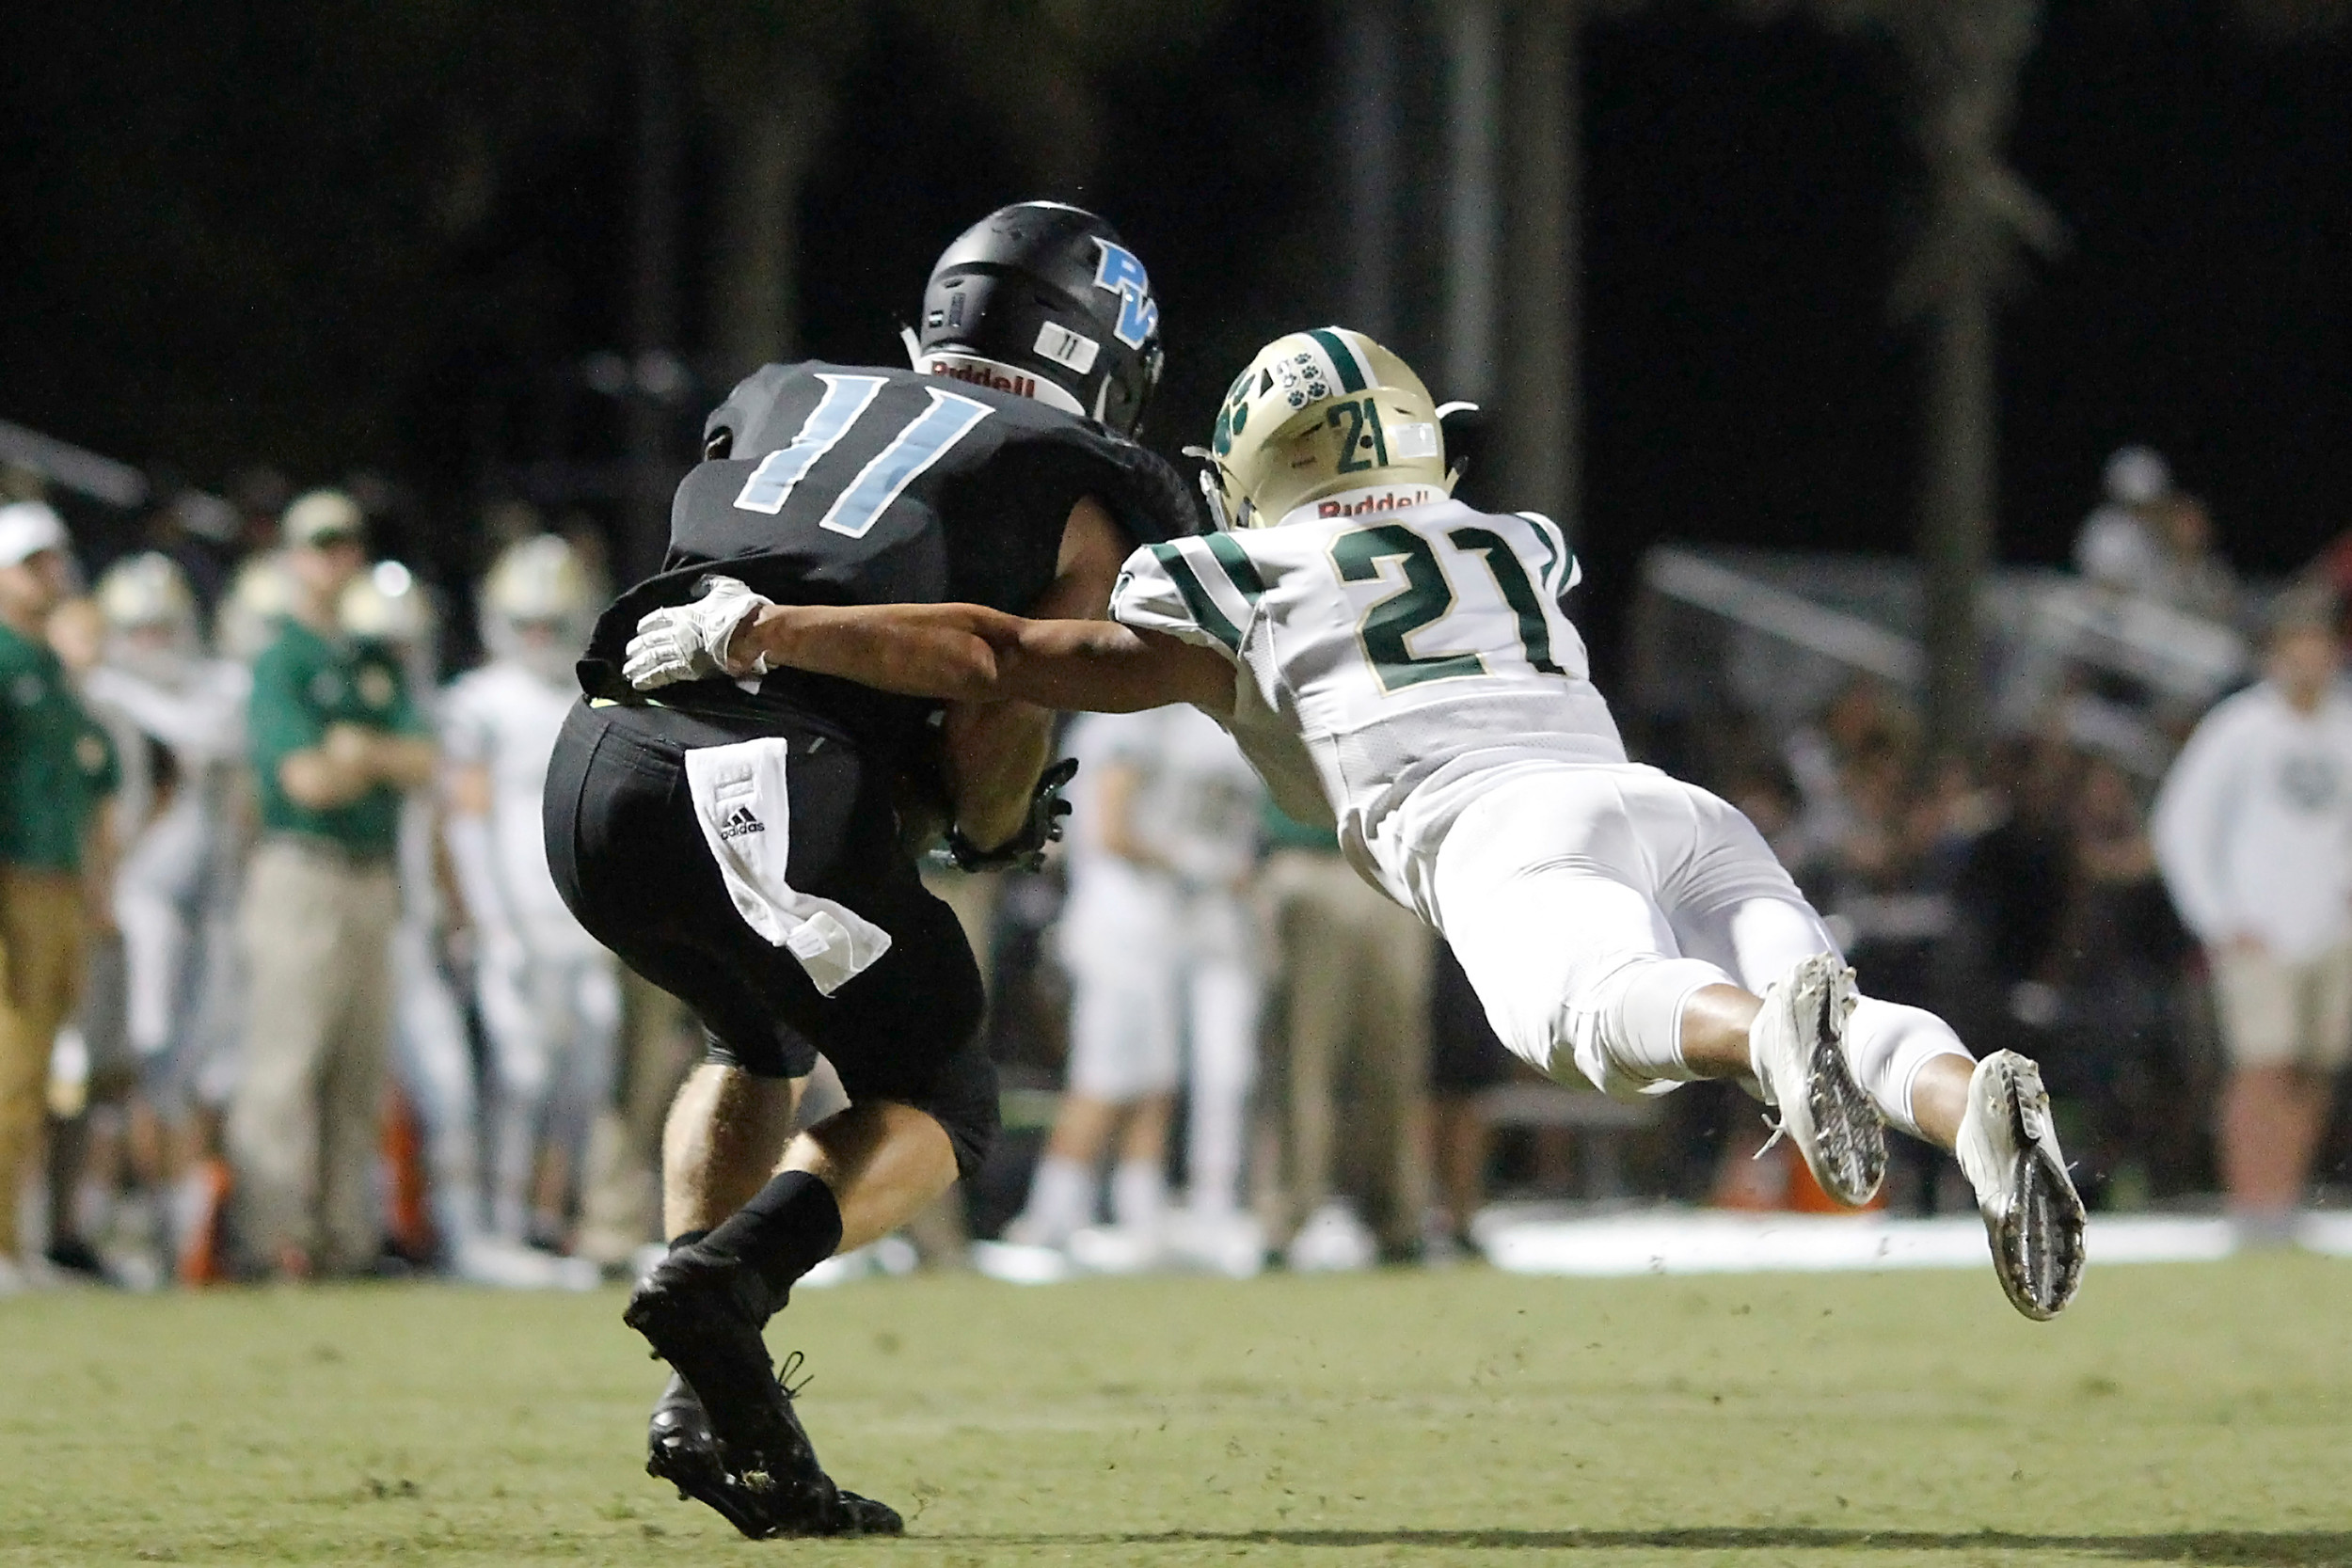 Kit Connelly (#11) catches a pass for the Sharks in front of Jacob Allsup (#21).